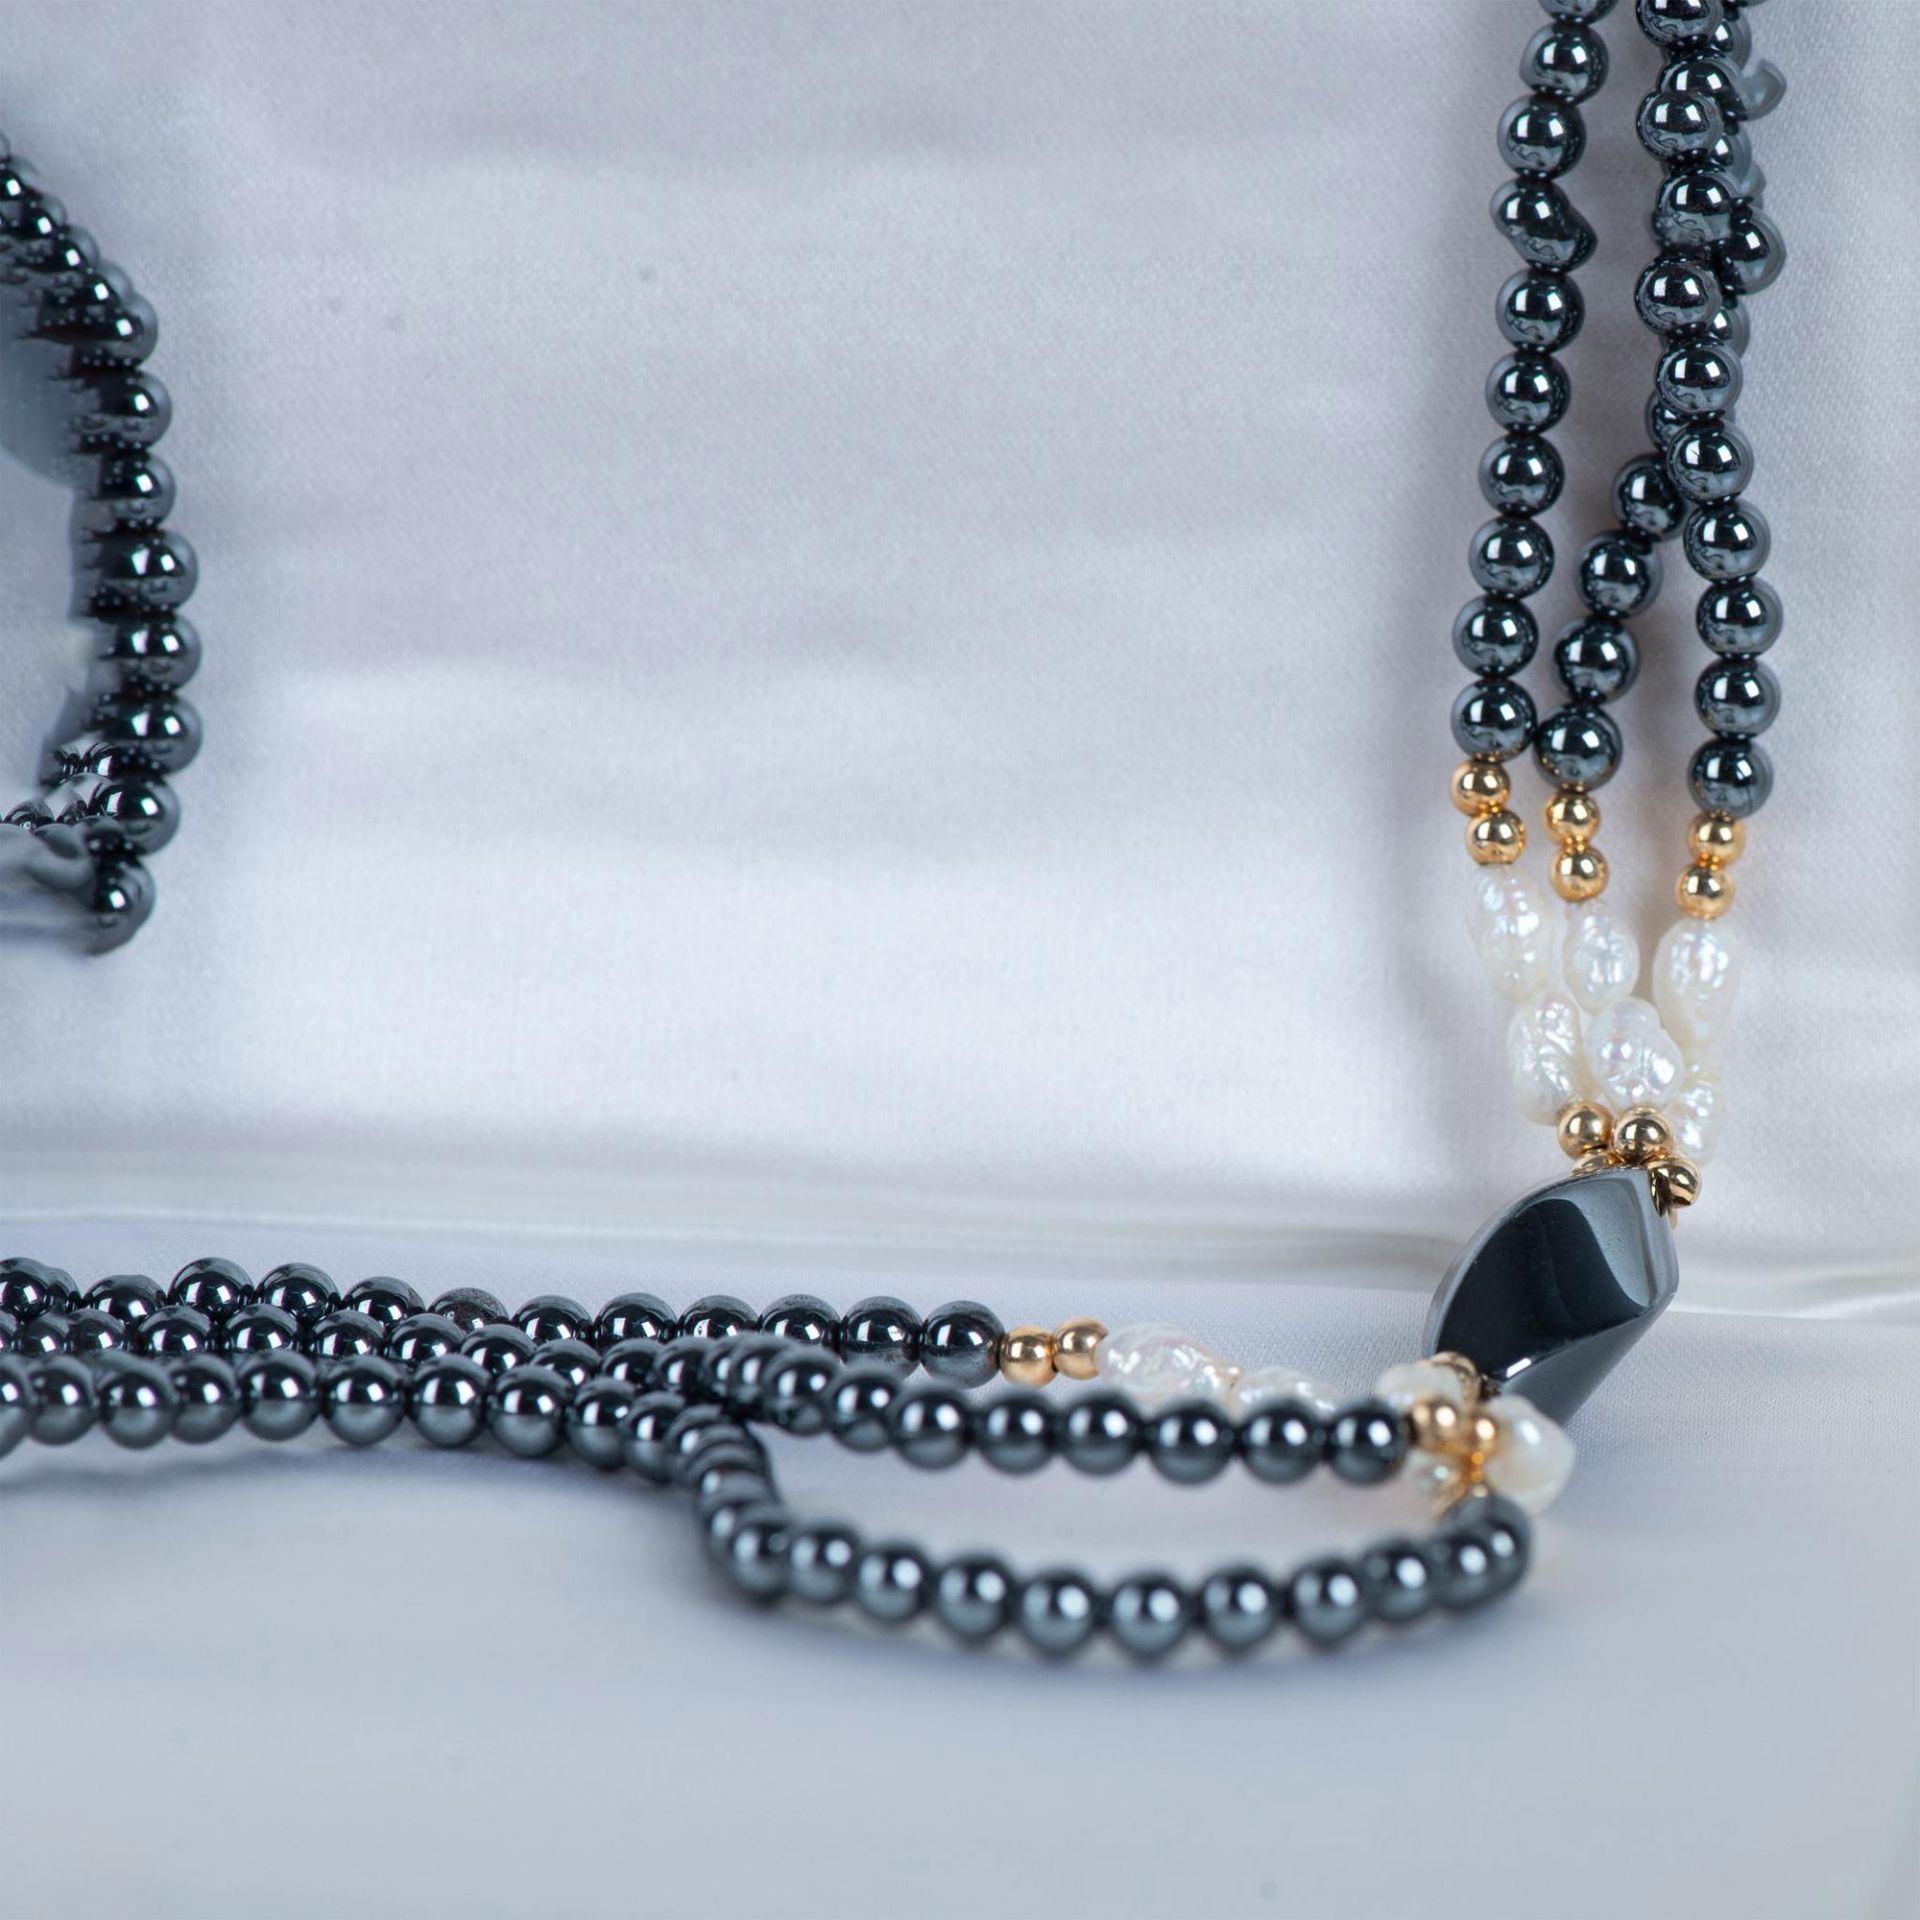 Black Onyx & Fresh Water Pearl Necklace - Image 4 of 7